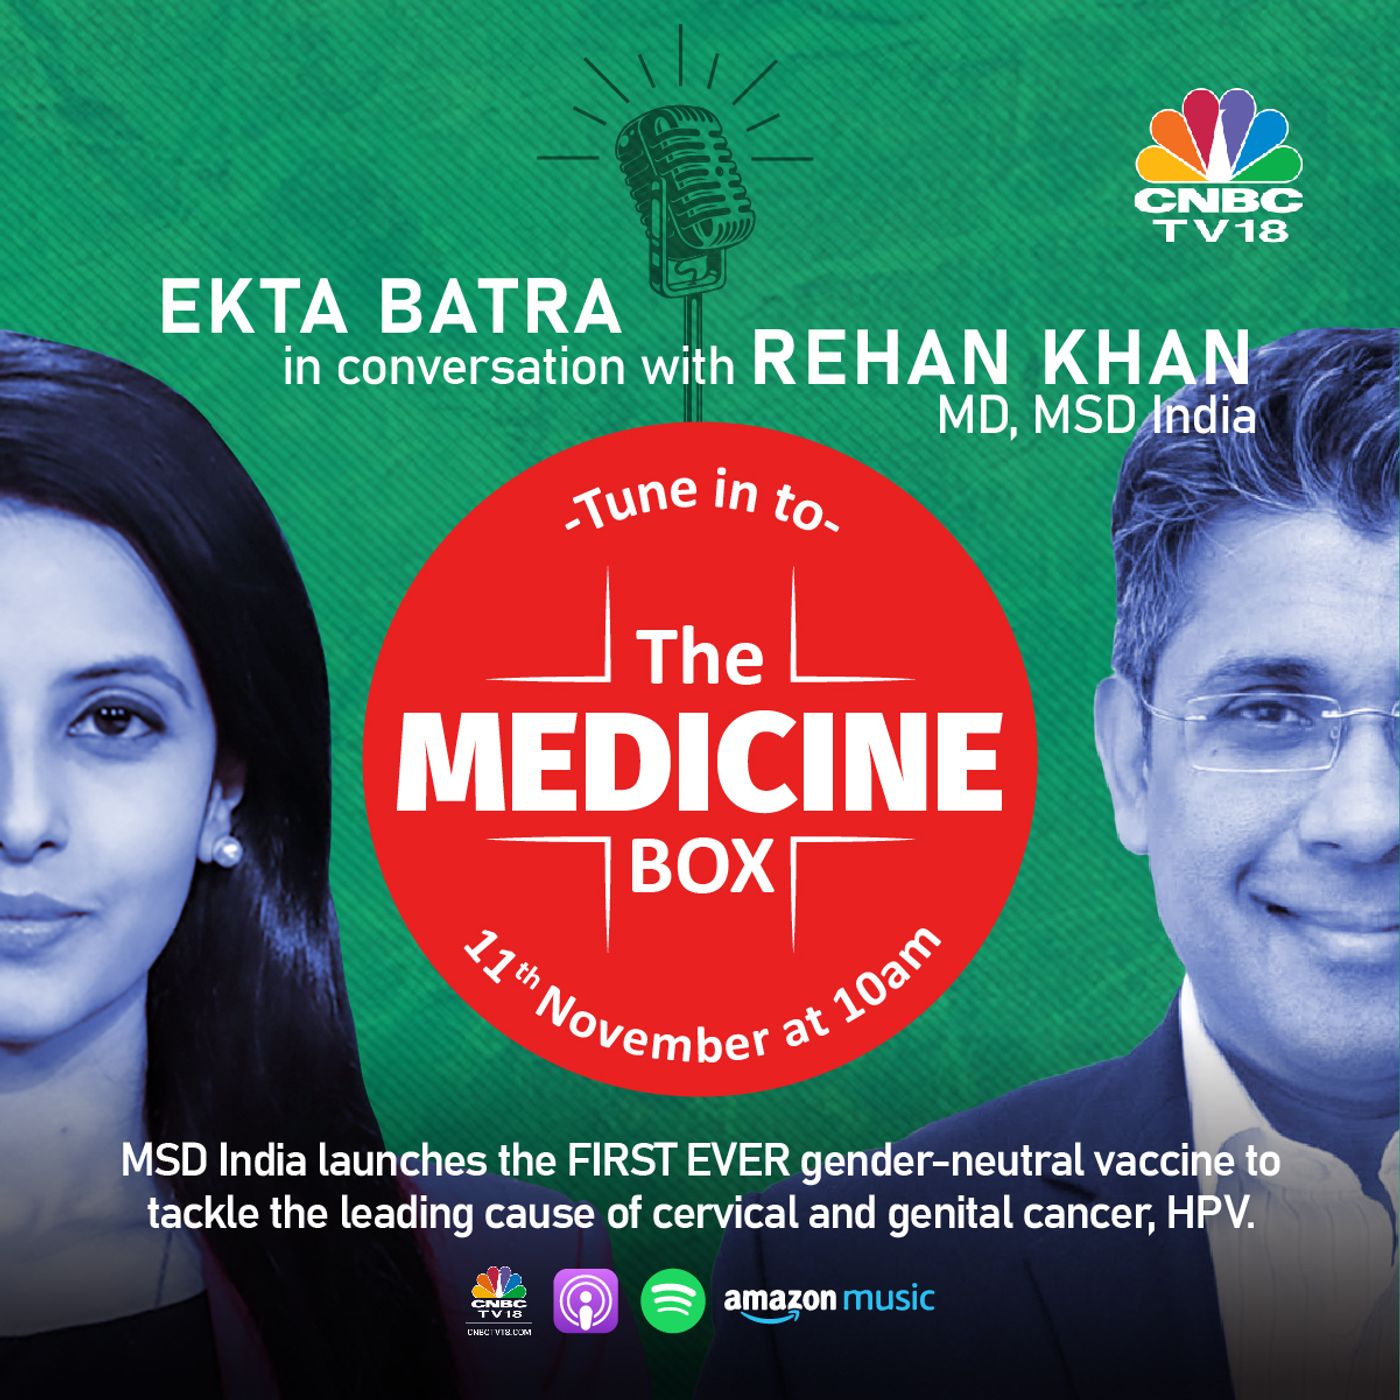 29: The Medicine Box: Rehan Khan talks about launch of MSD India's gender-neutral HPV vaccine